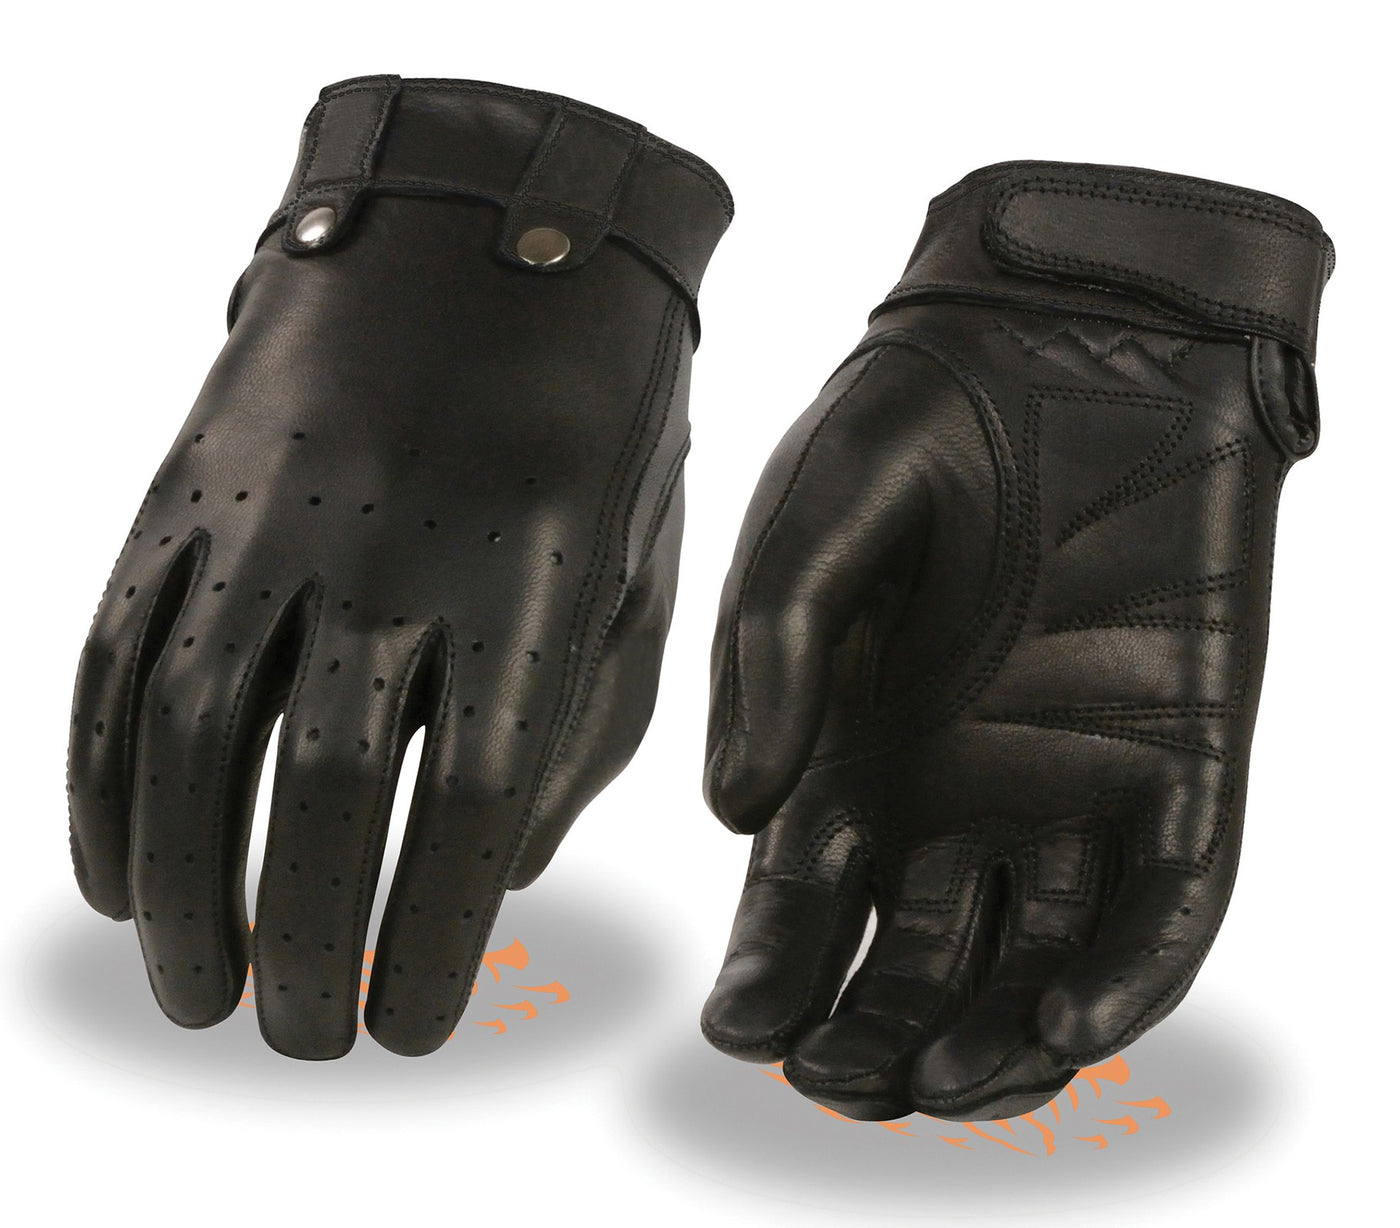 Ladies black leather riding gloves, gel padded palm, velcro closure. Available for purchase in our shop in Smyrna, TN, just outside Nashville. This style has perforated leather across fingers to help with ventilation.